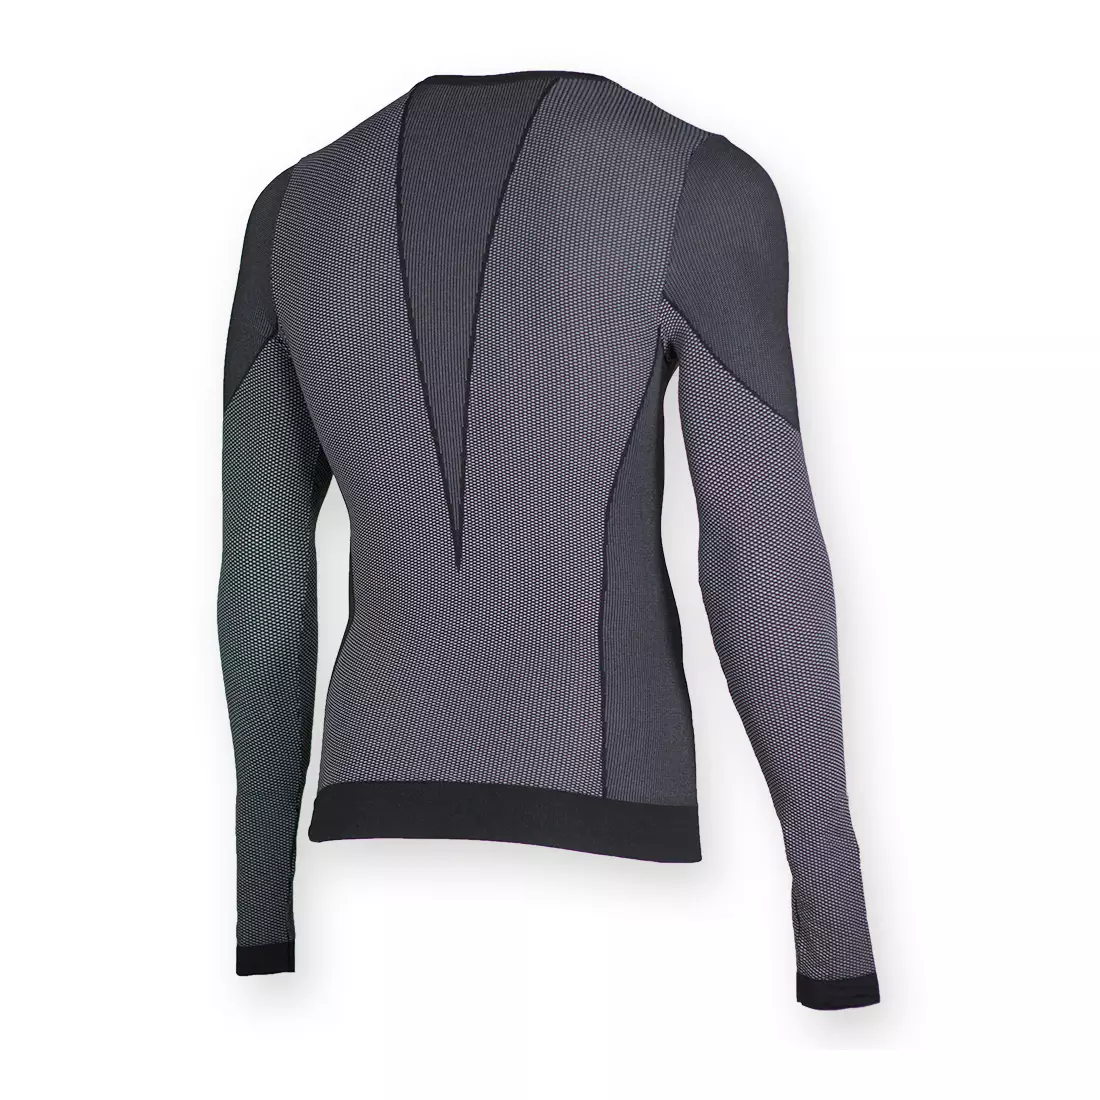 ROGELLI CHASE - 070.006 - thermal underwear - men's long-sleeved T-shirt - color: Black